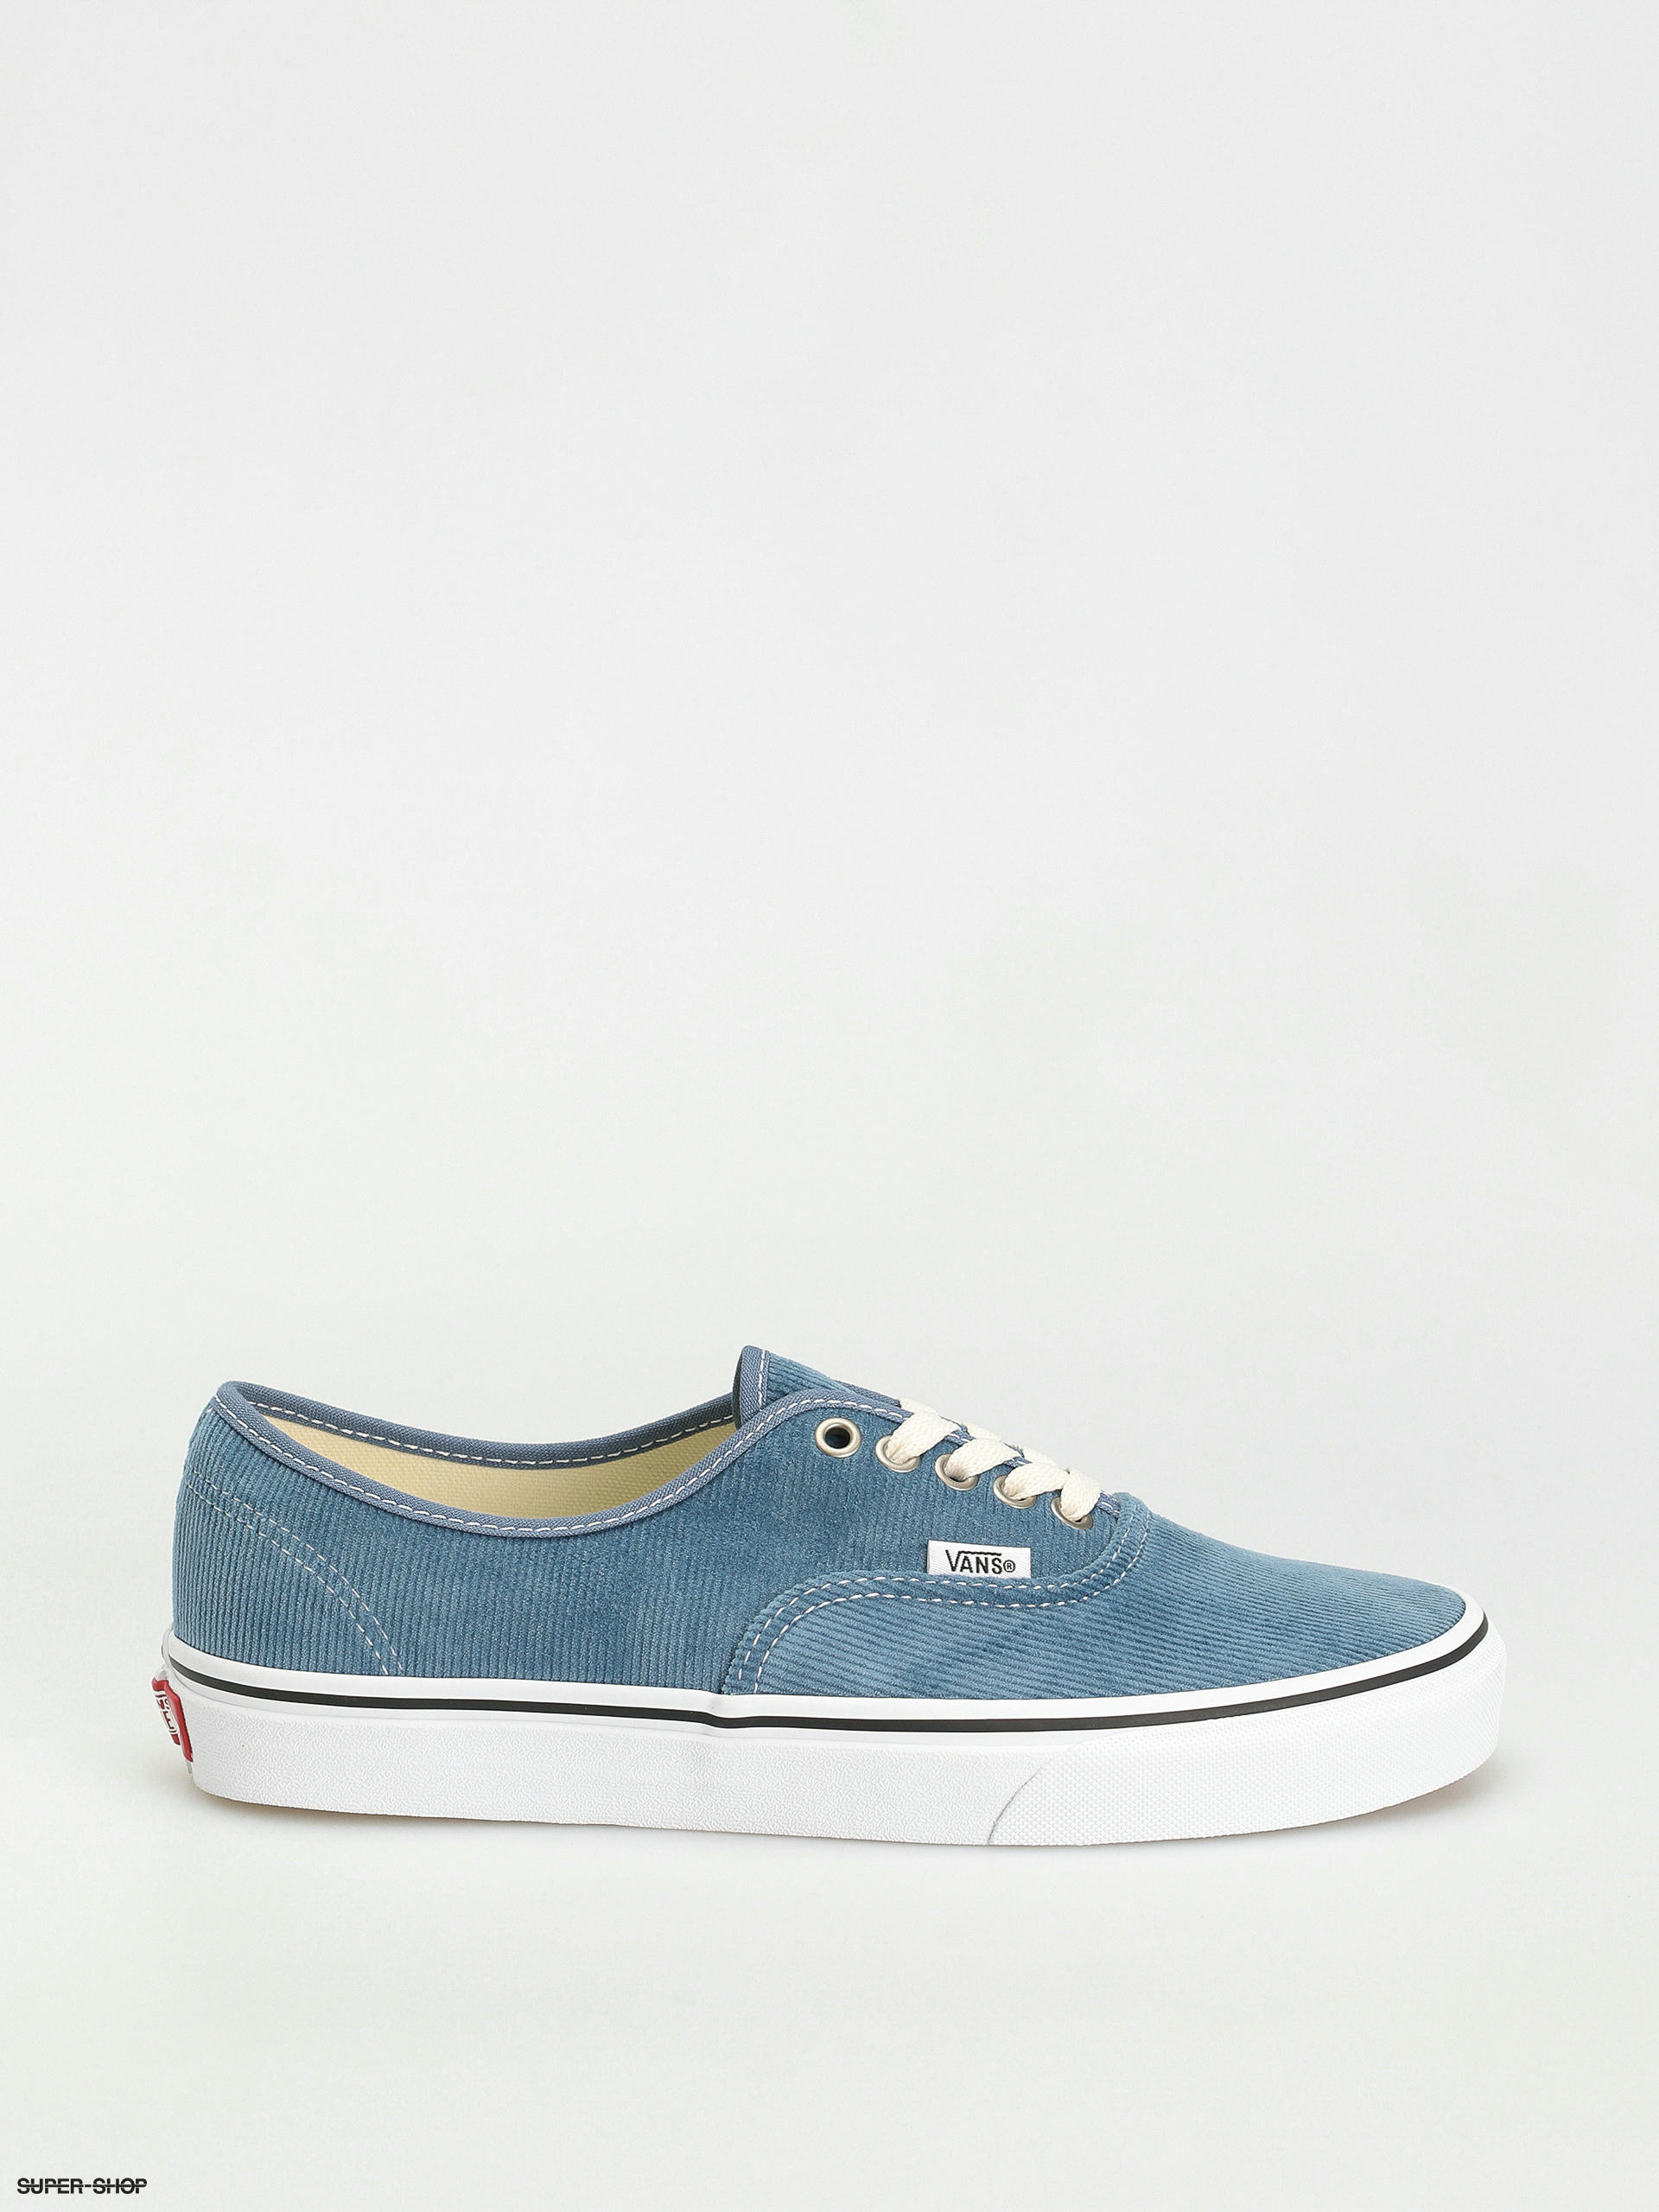 VANS OFF THE WALL NAVY BLUE MEN'S 6.5 WOMEN'S 8 AUTHENTIC SHOES NEW -  clothing & accessories - by owner - apparel sale...